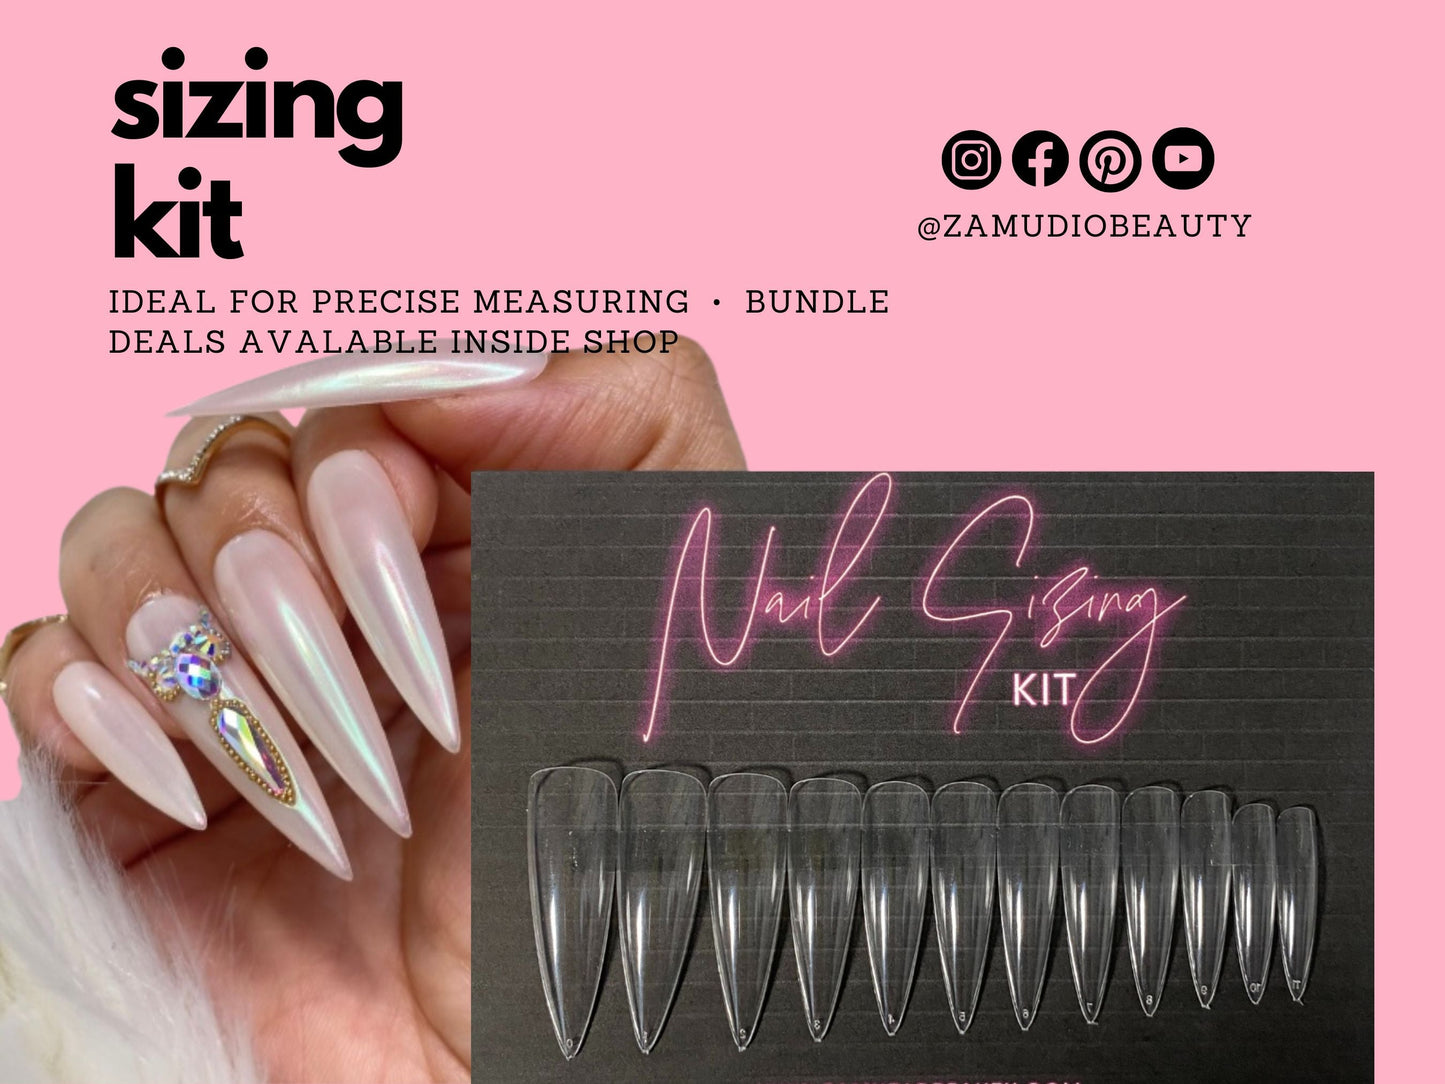 Ombre Bling Press on Nails